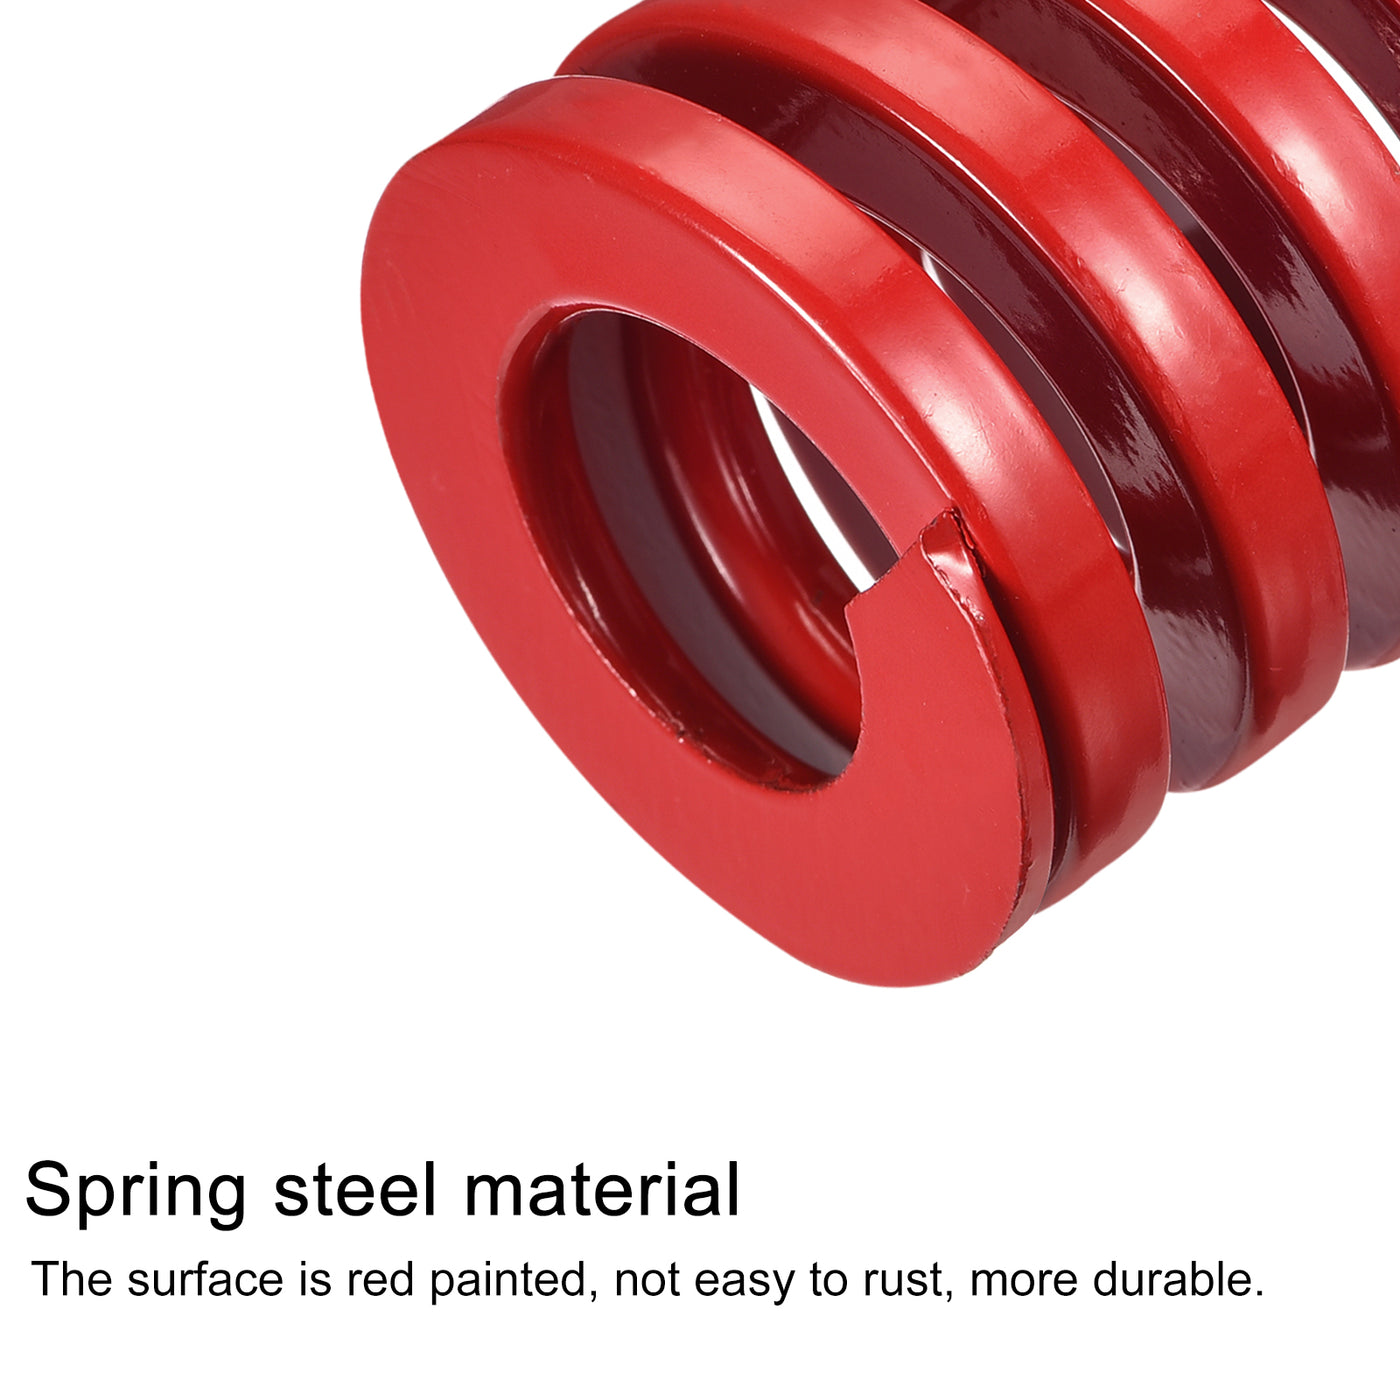 uxcell Uxcell Die Spring, 40mm OD 175mm Long Spiral Stamping Medium Load Compression, Red